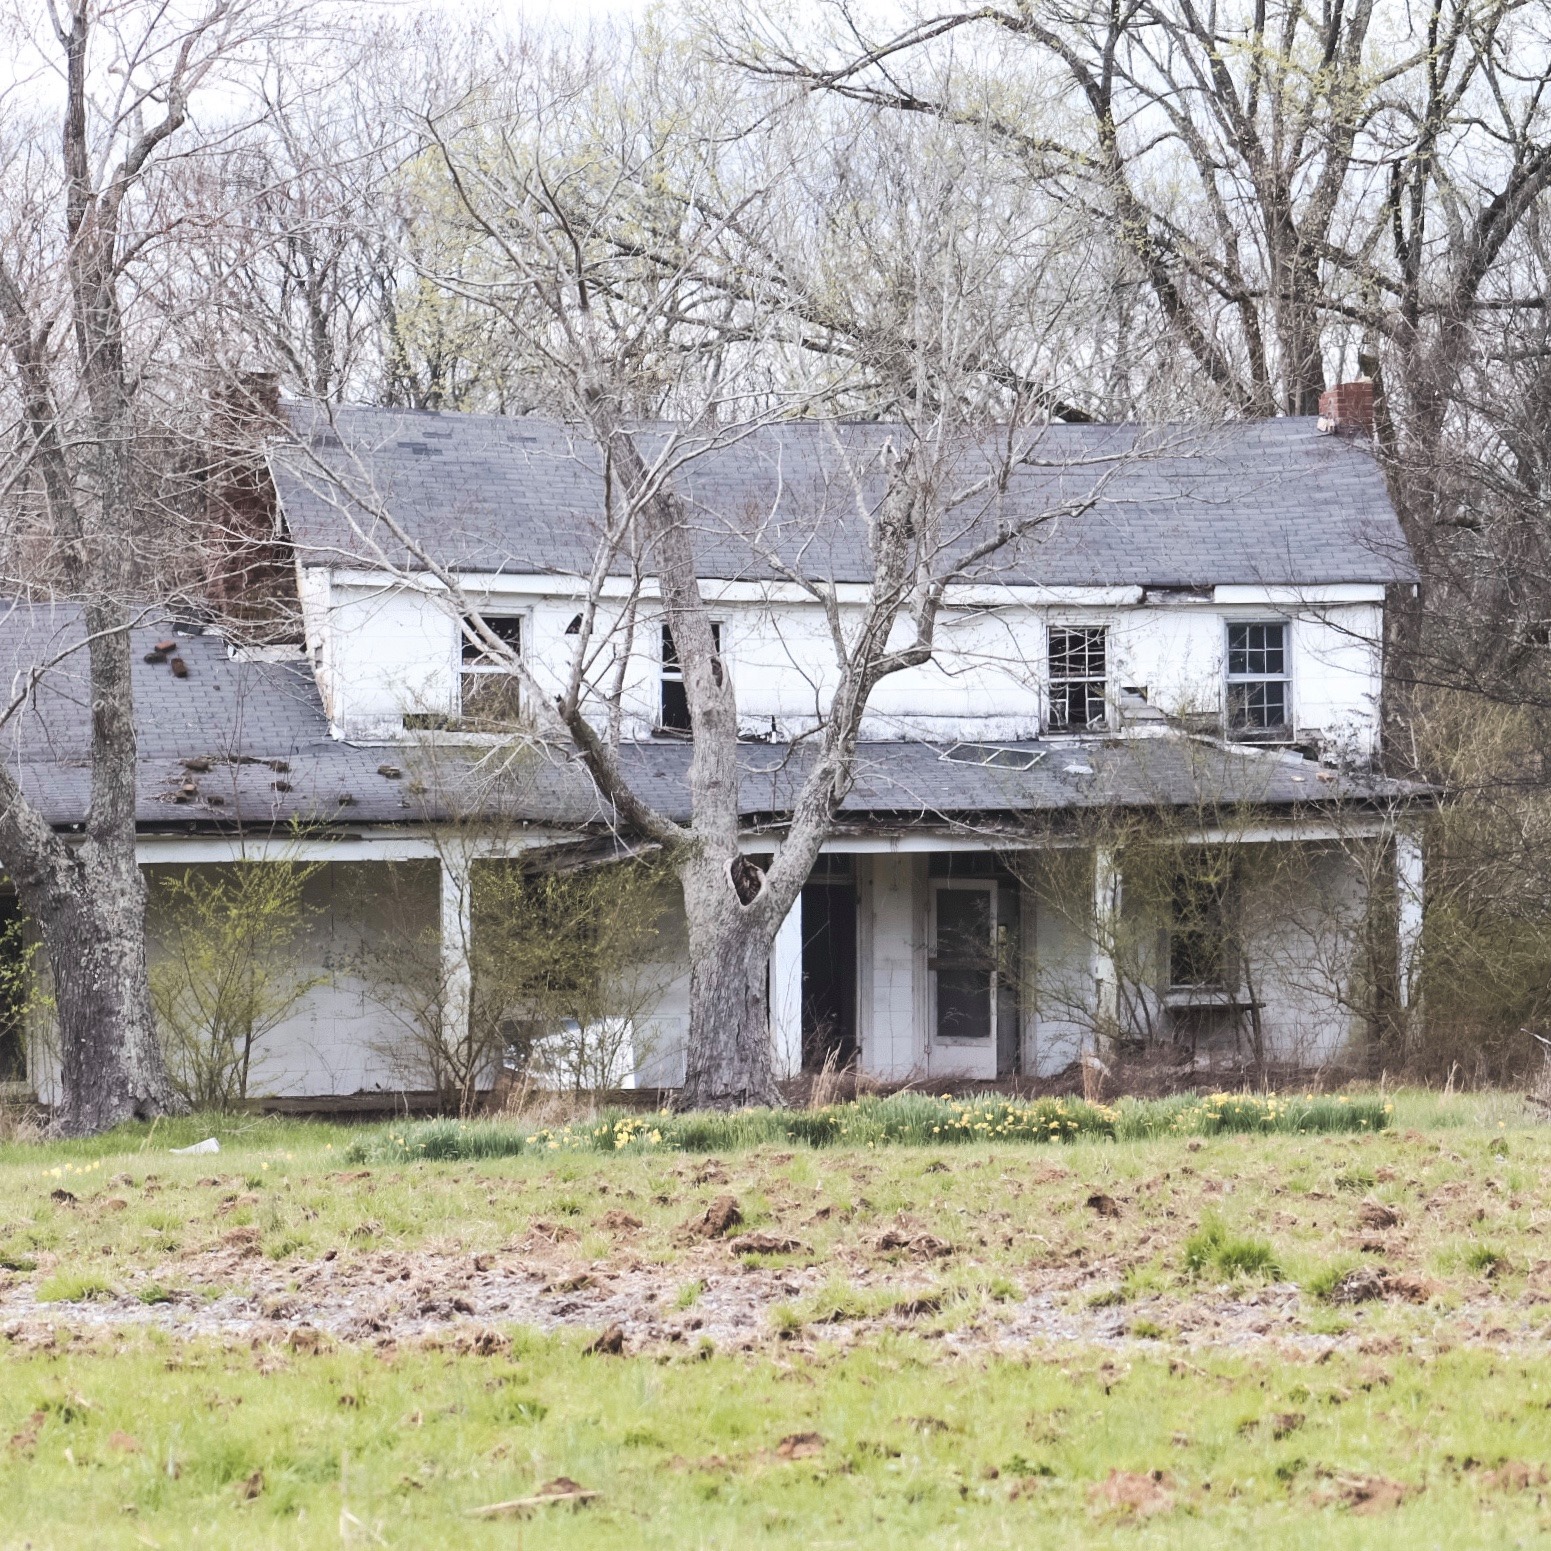 Abandoned House – Now Gone